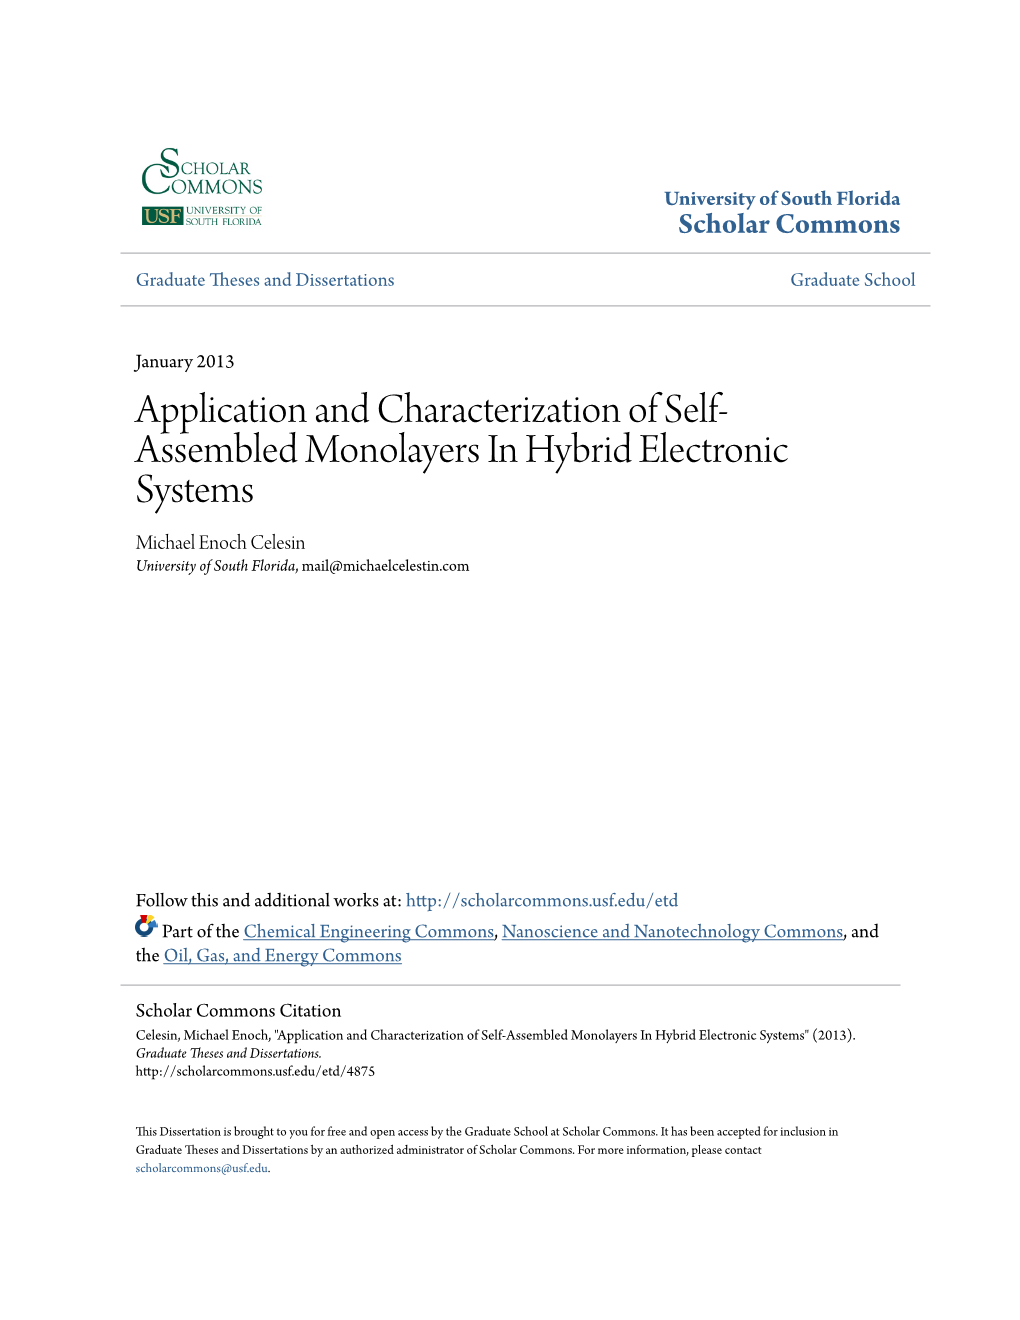 Application and Characterization of Self-Assembled Monolayers in Hybrid Electronic Systems" (2013)